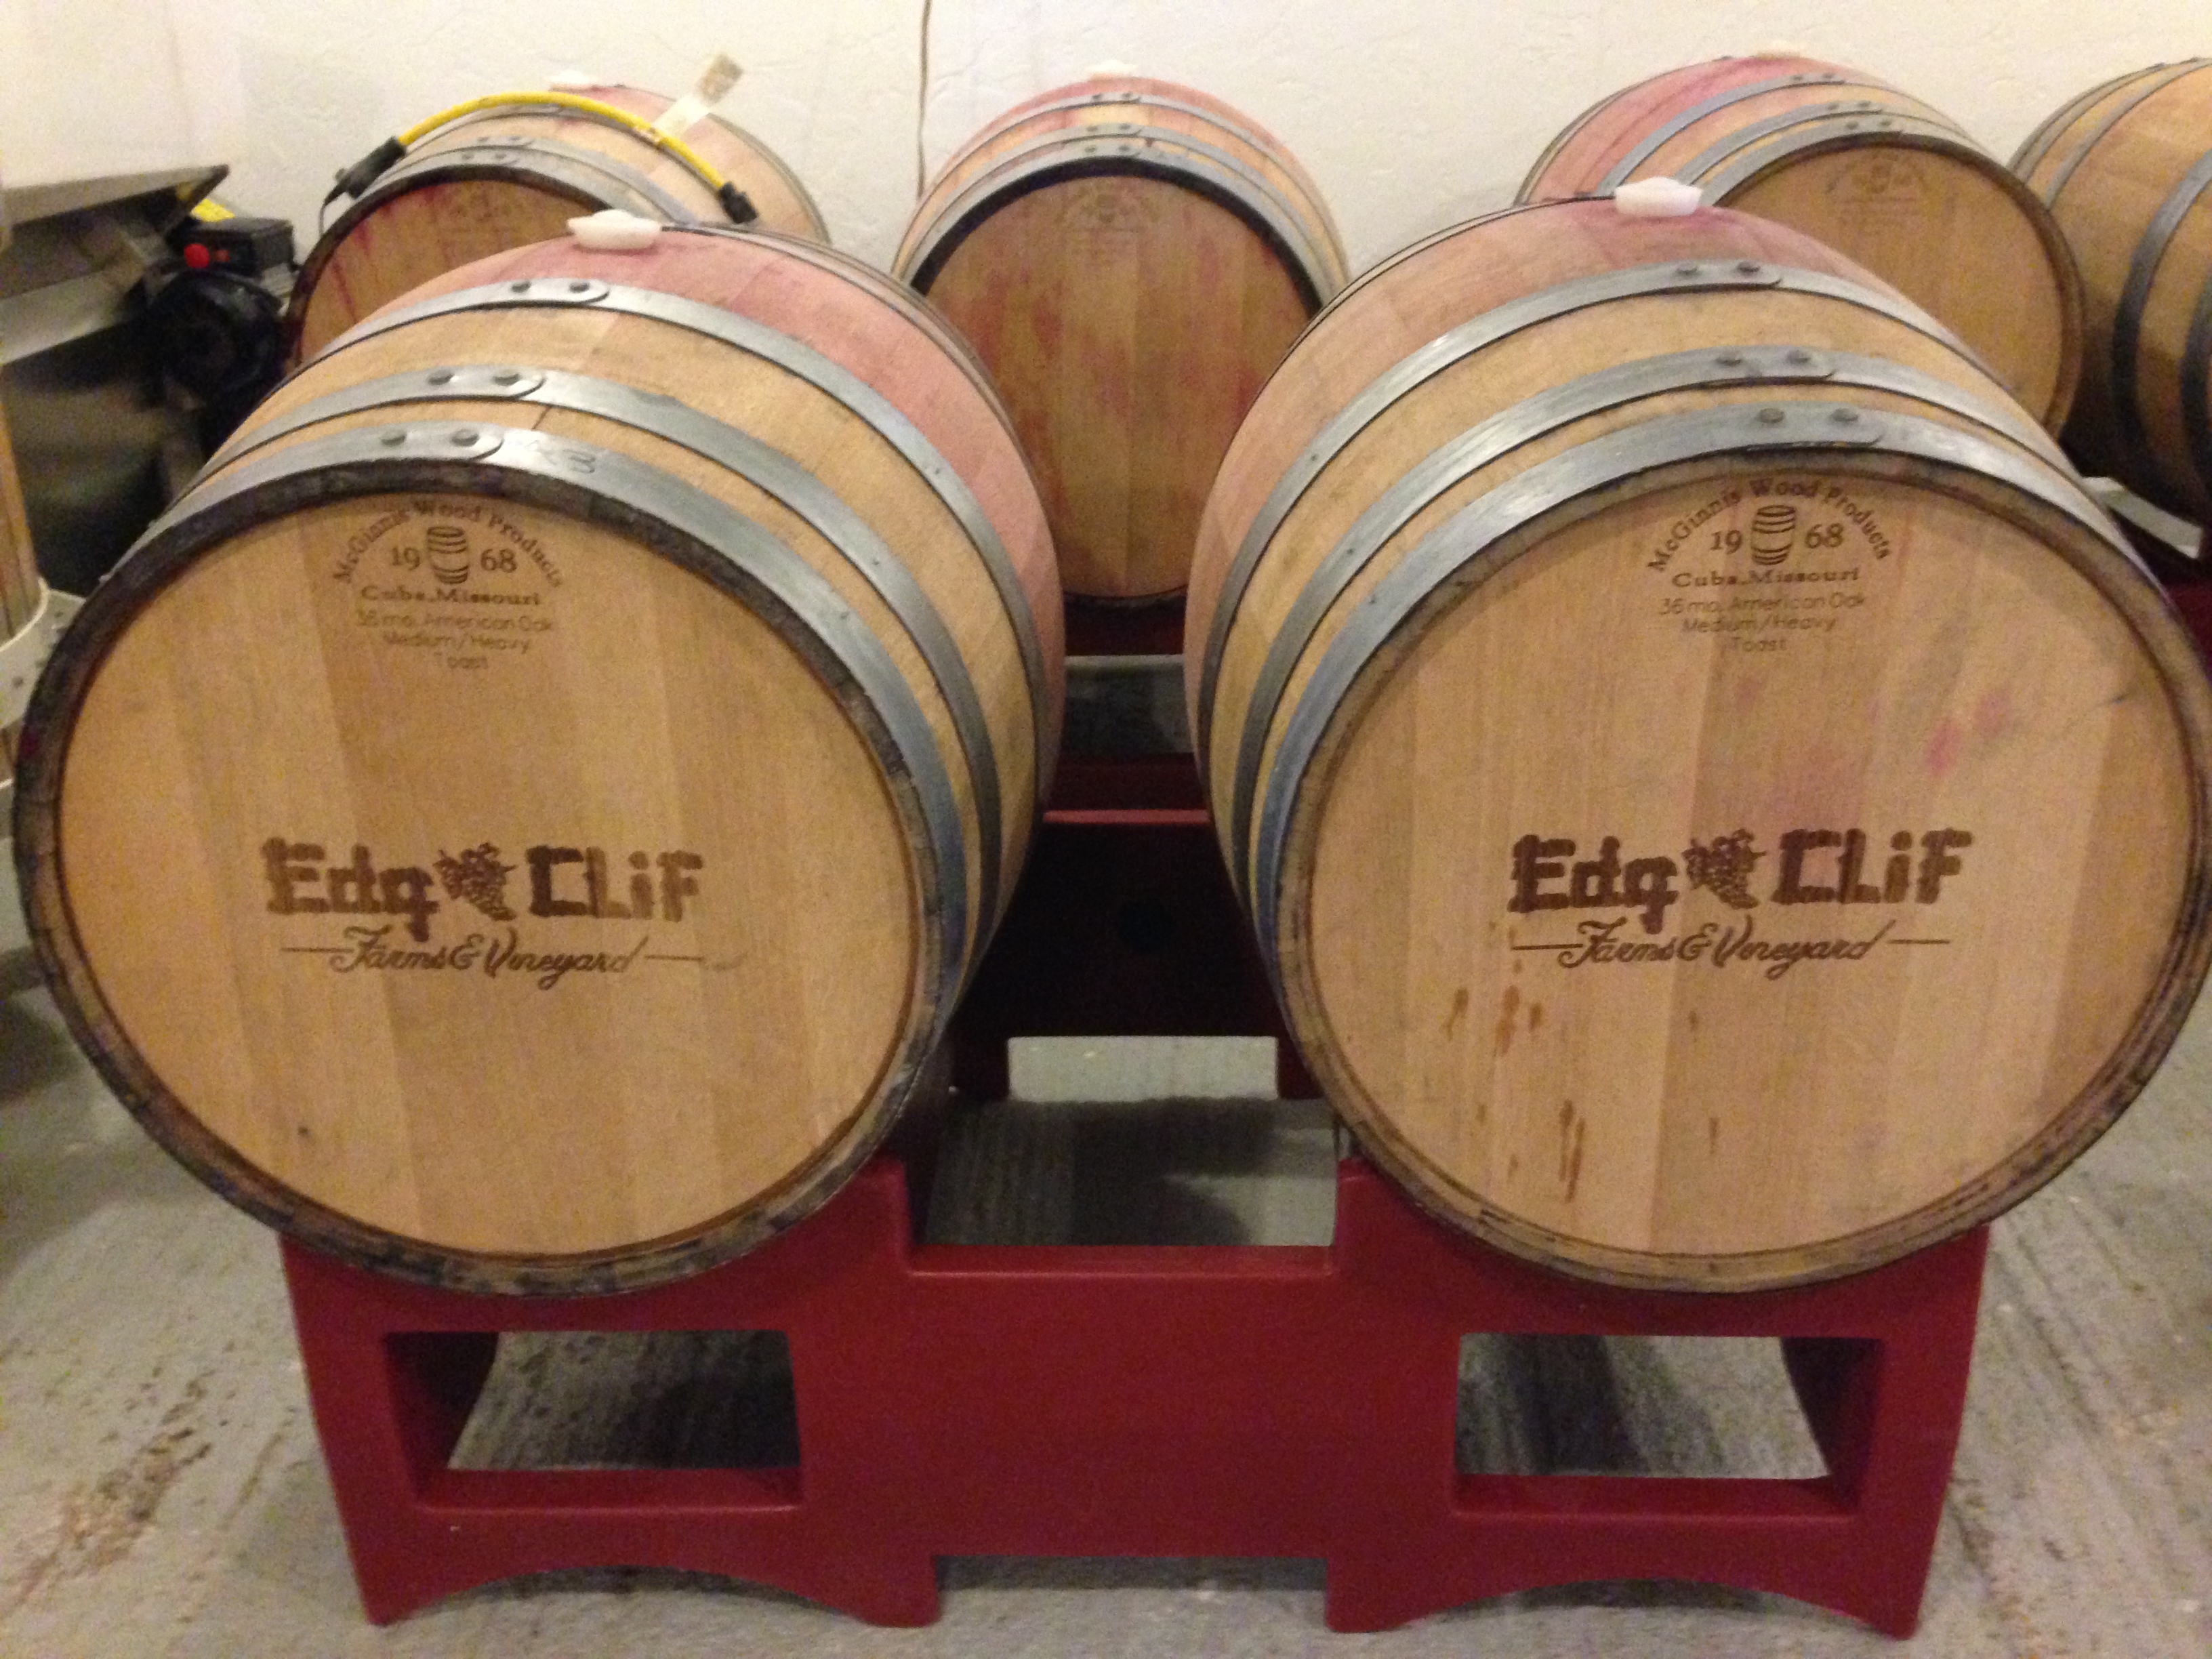 Edg-Clif Farms & Vineyard - indoor photo of several wine barrels with the winery logo on the front.